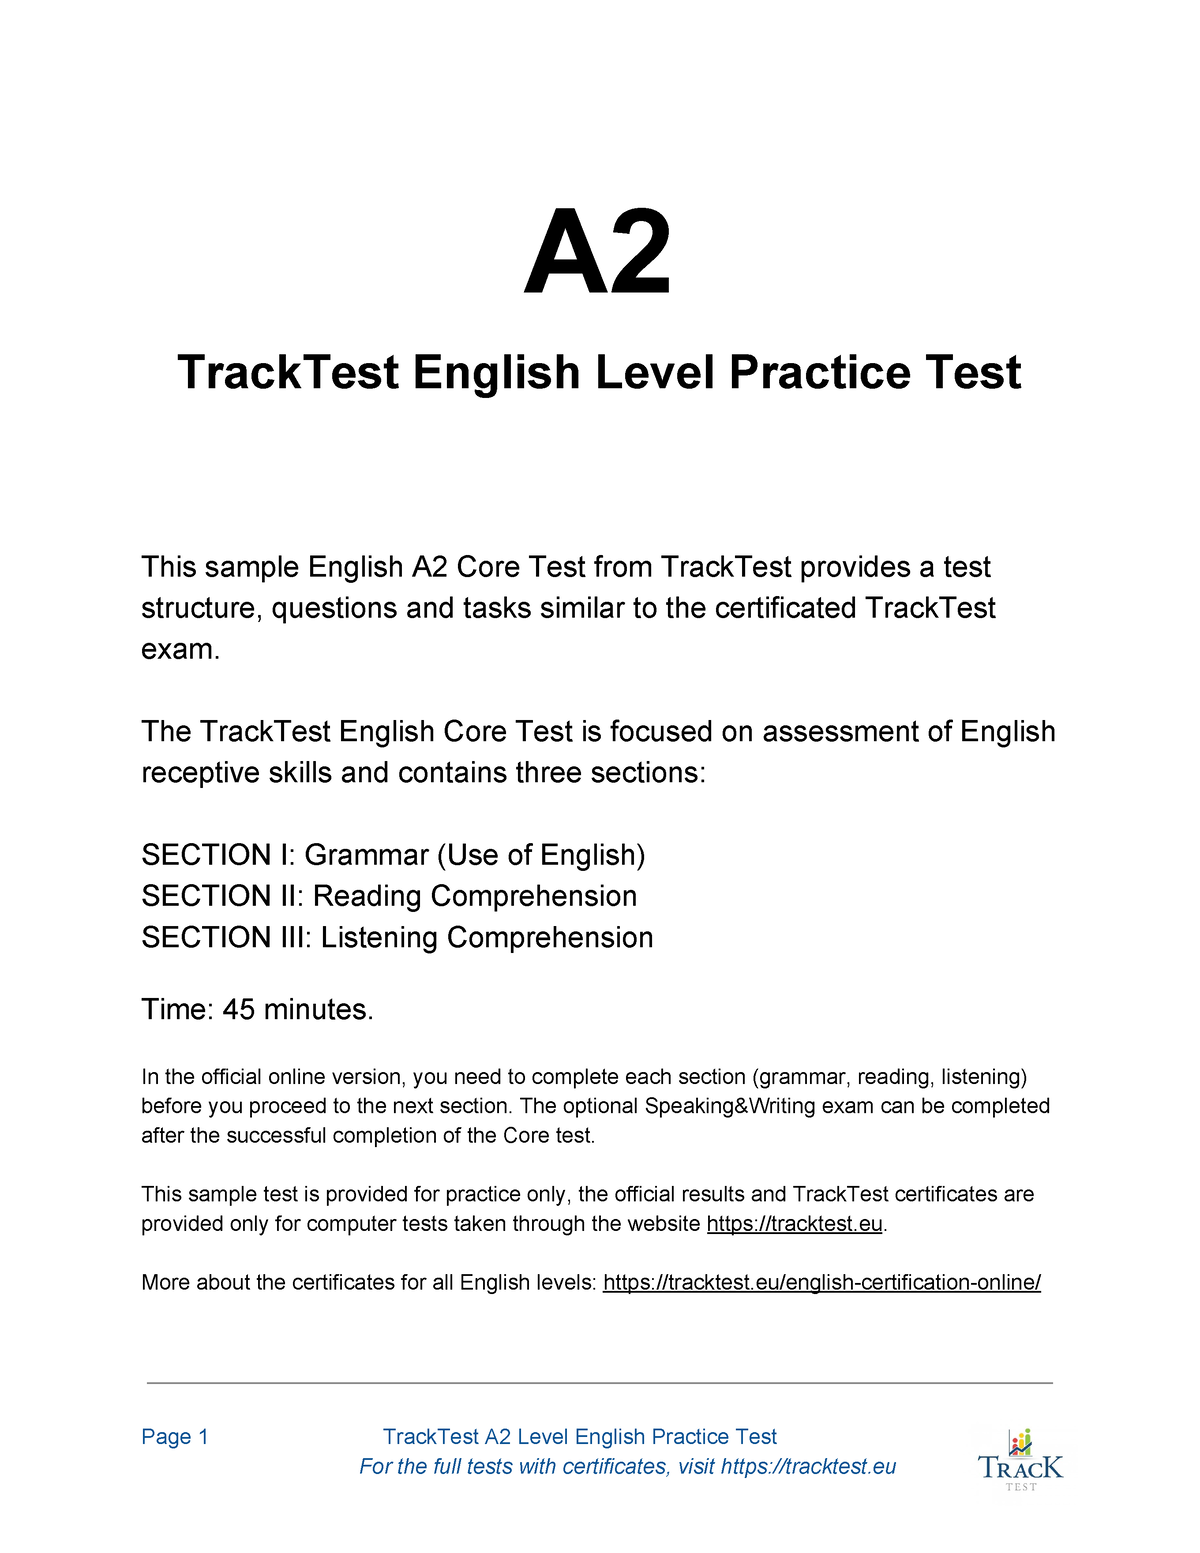 a2-english-test-with-answers-a-tracktest-english-level-practice-test